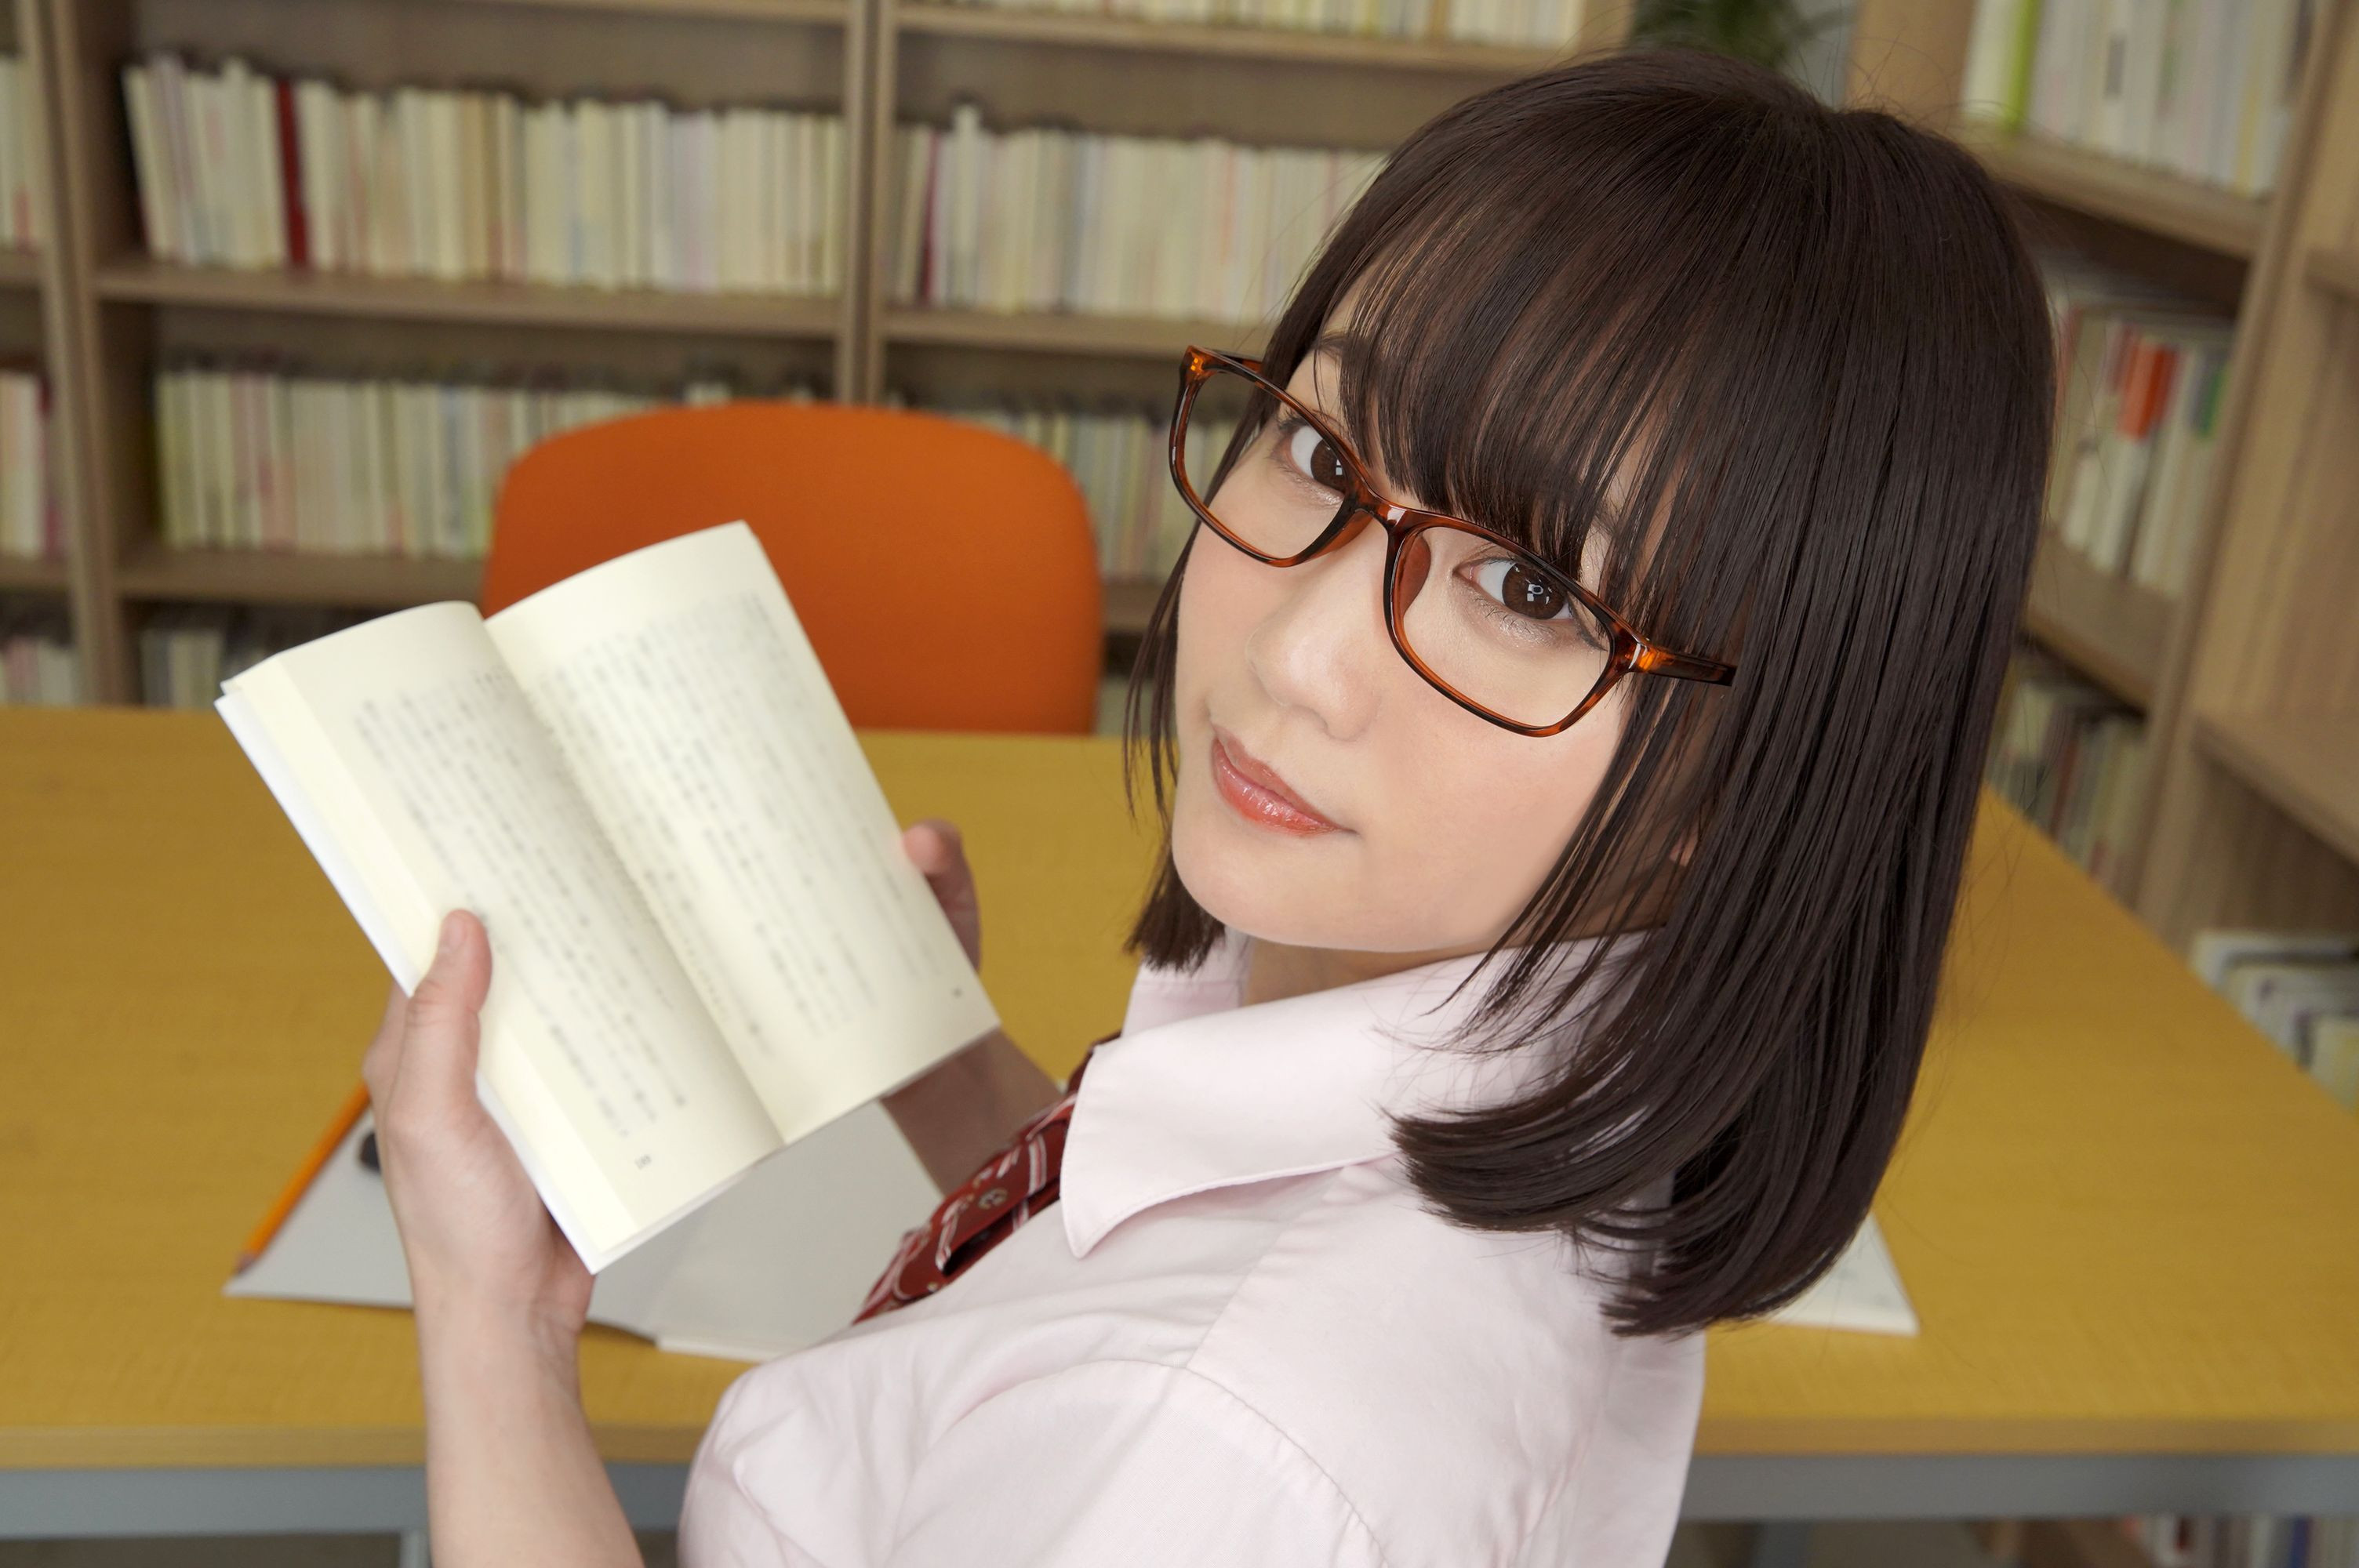 Tempted by a Beautiful Girl with Glasses and a Uniform Part 1 - Asian Schoolgirl Library Sex Slideshow